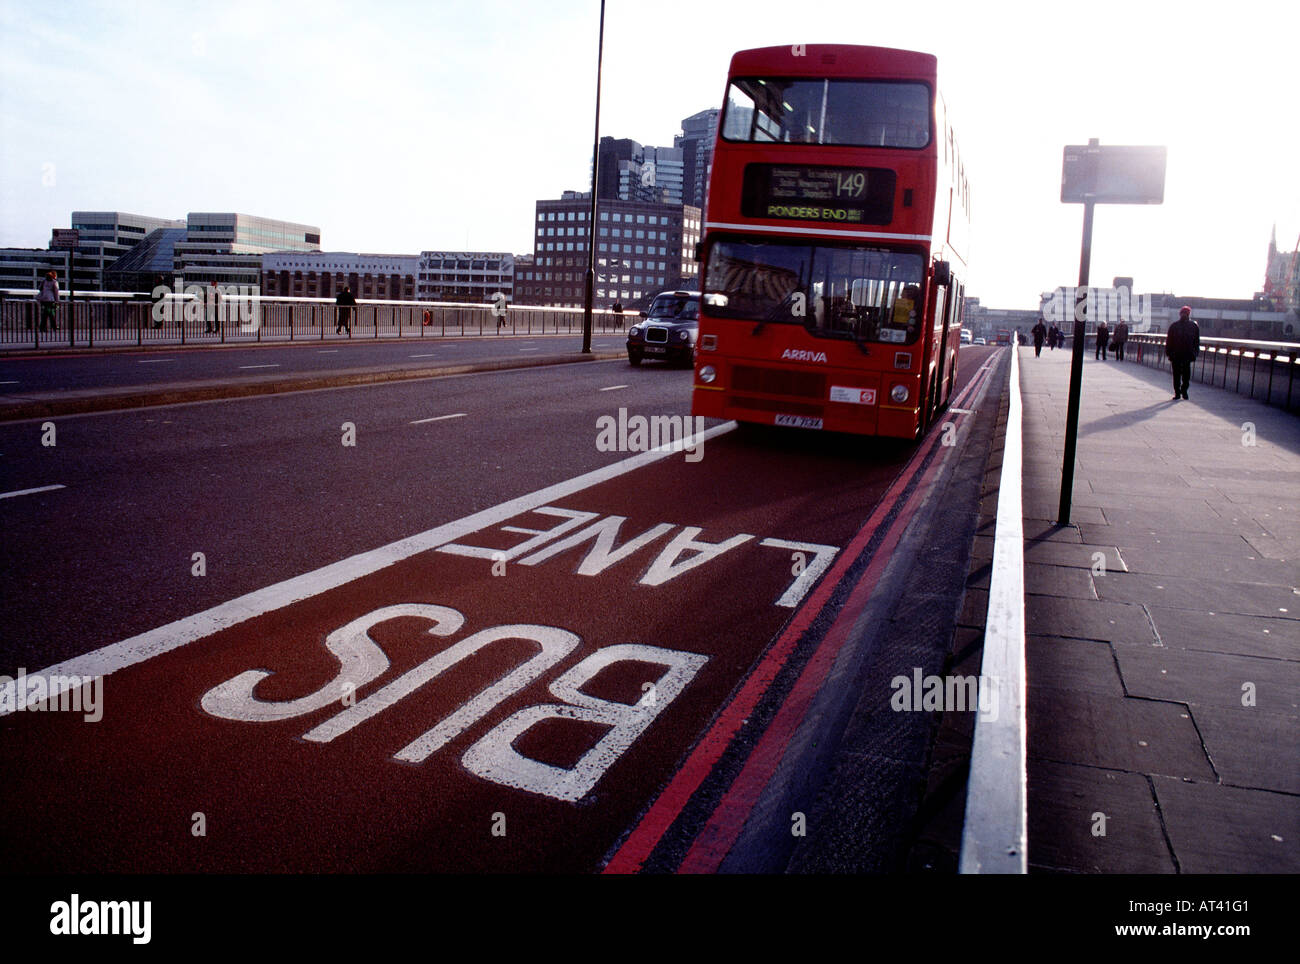 Red double decker bus in London bus lane Stock Photo